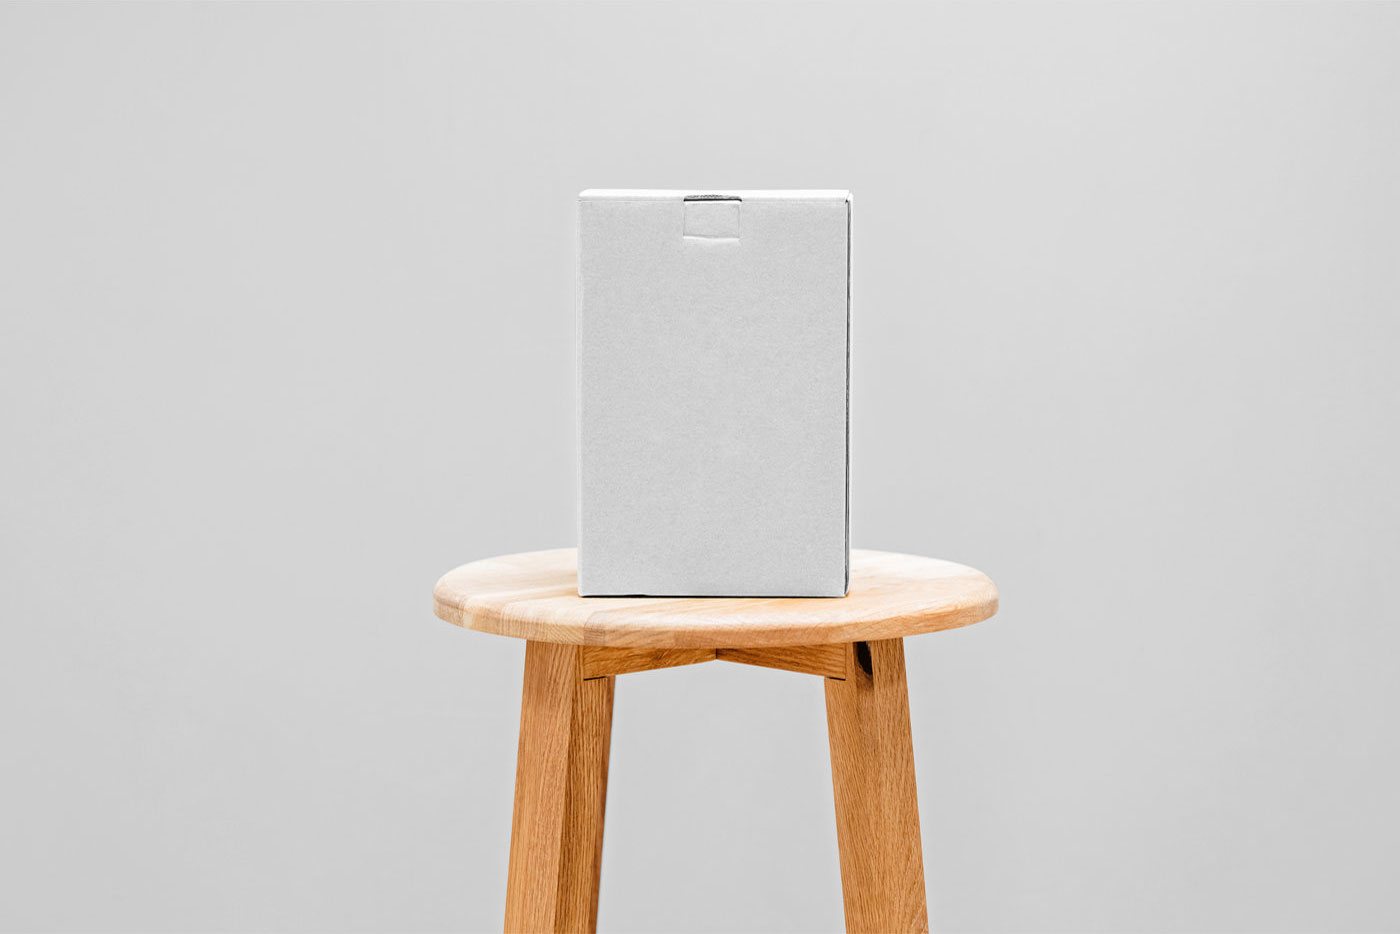 Front View of a Cardboard Box Mockup on a Wooden Chair FREE PSD